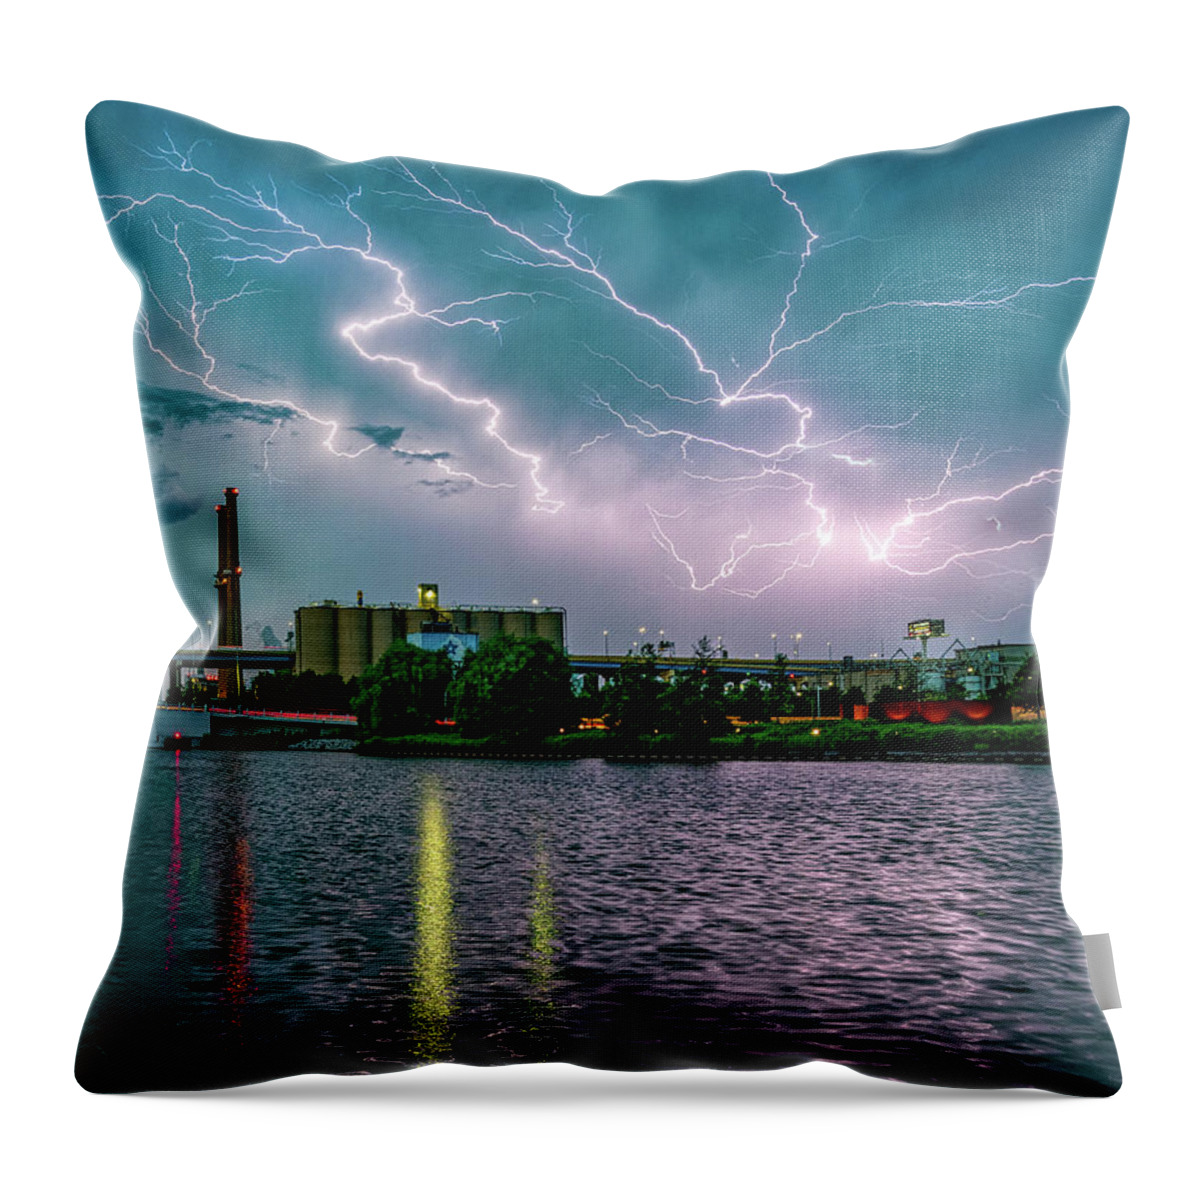  Throw Pillow featuring the photograph Bingo by Kristine Hinrichs